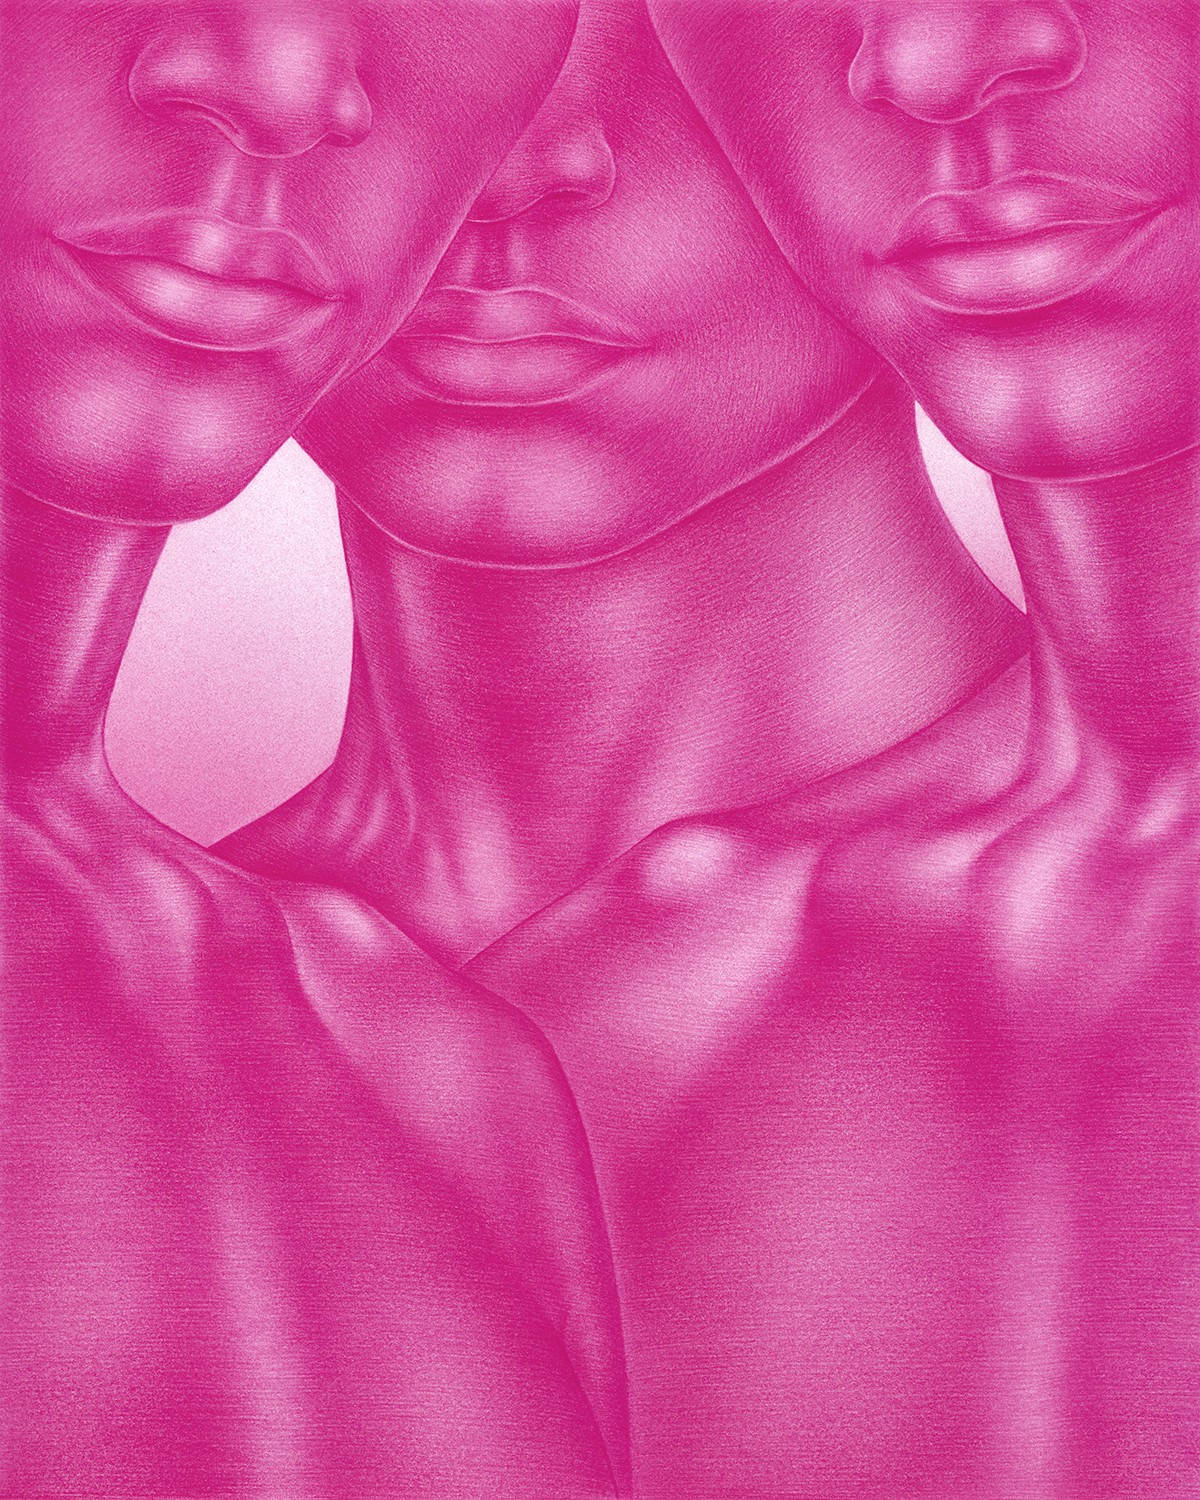 a pencil drawing in pink, of three figures seen from the chest to the nose